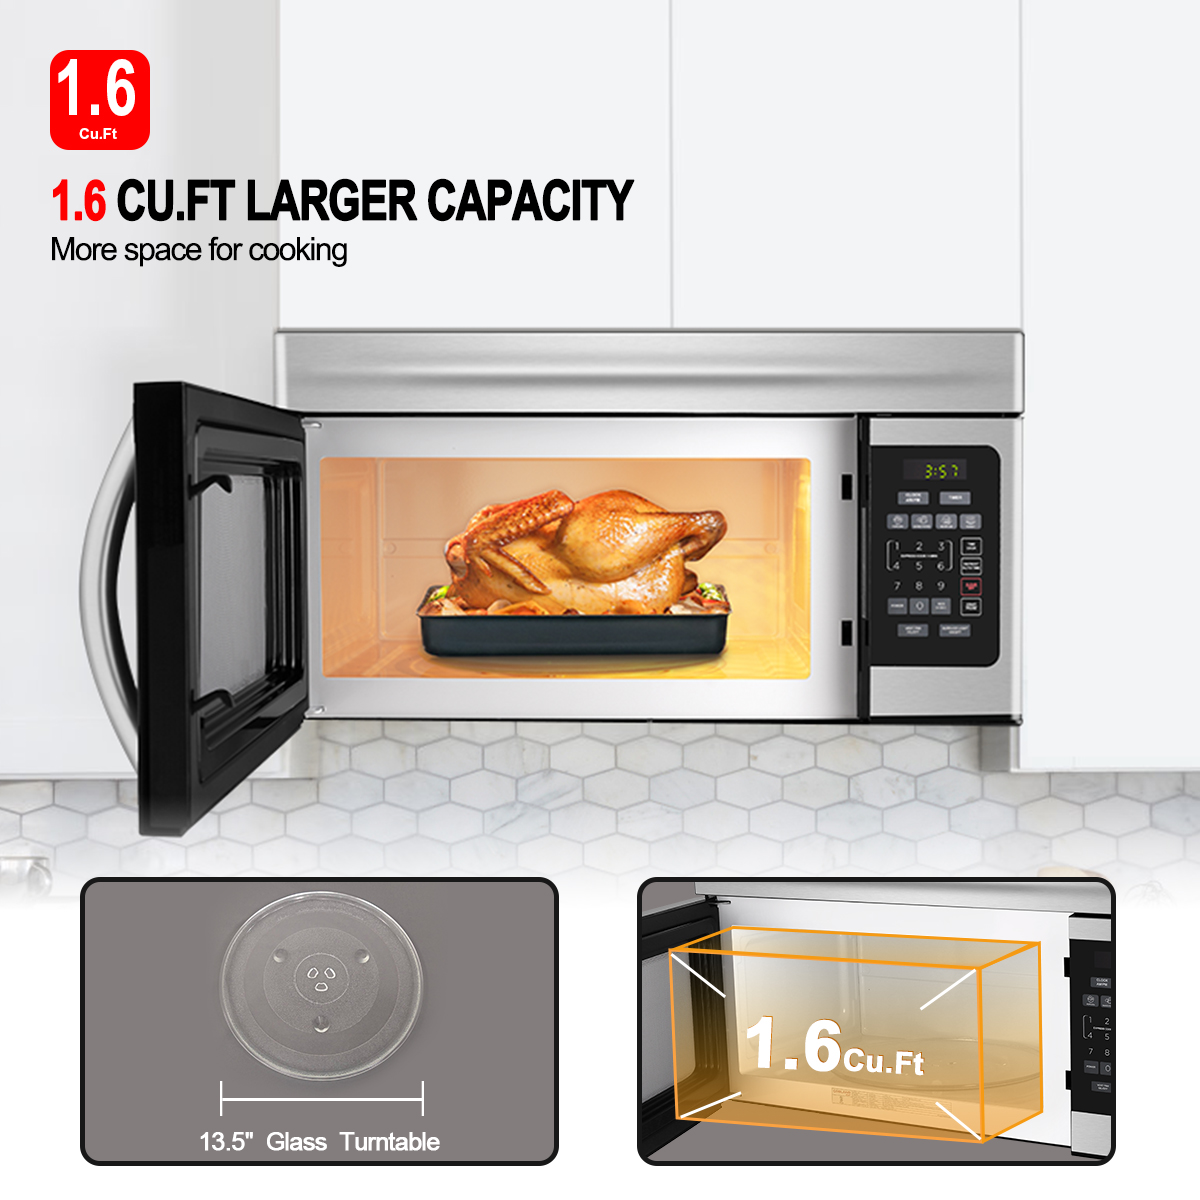 Gasland Chef 30" Microwave Oven in Stainless Steel